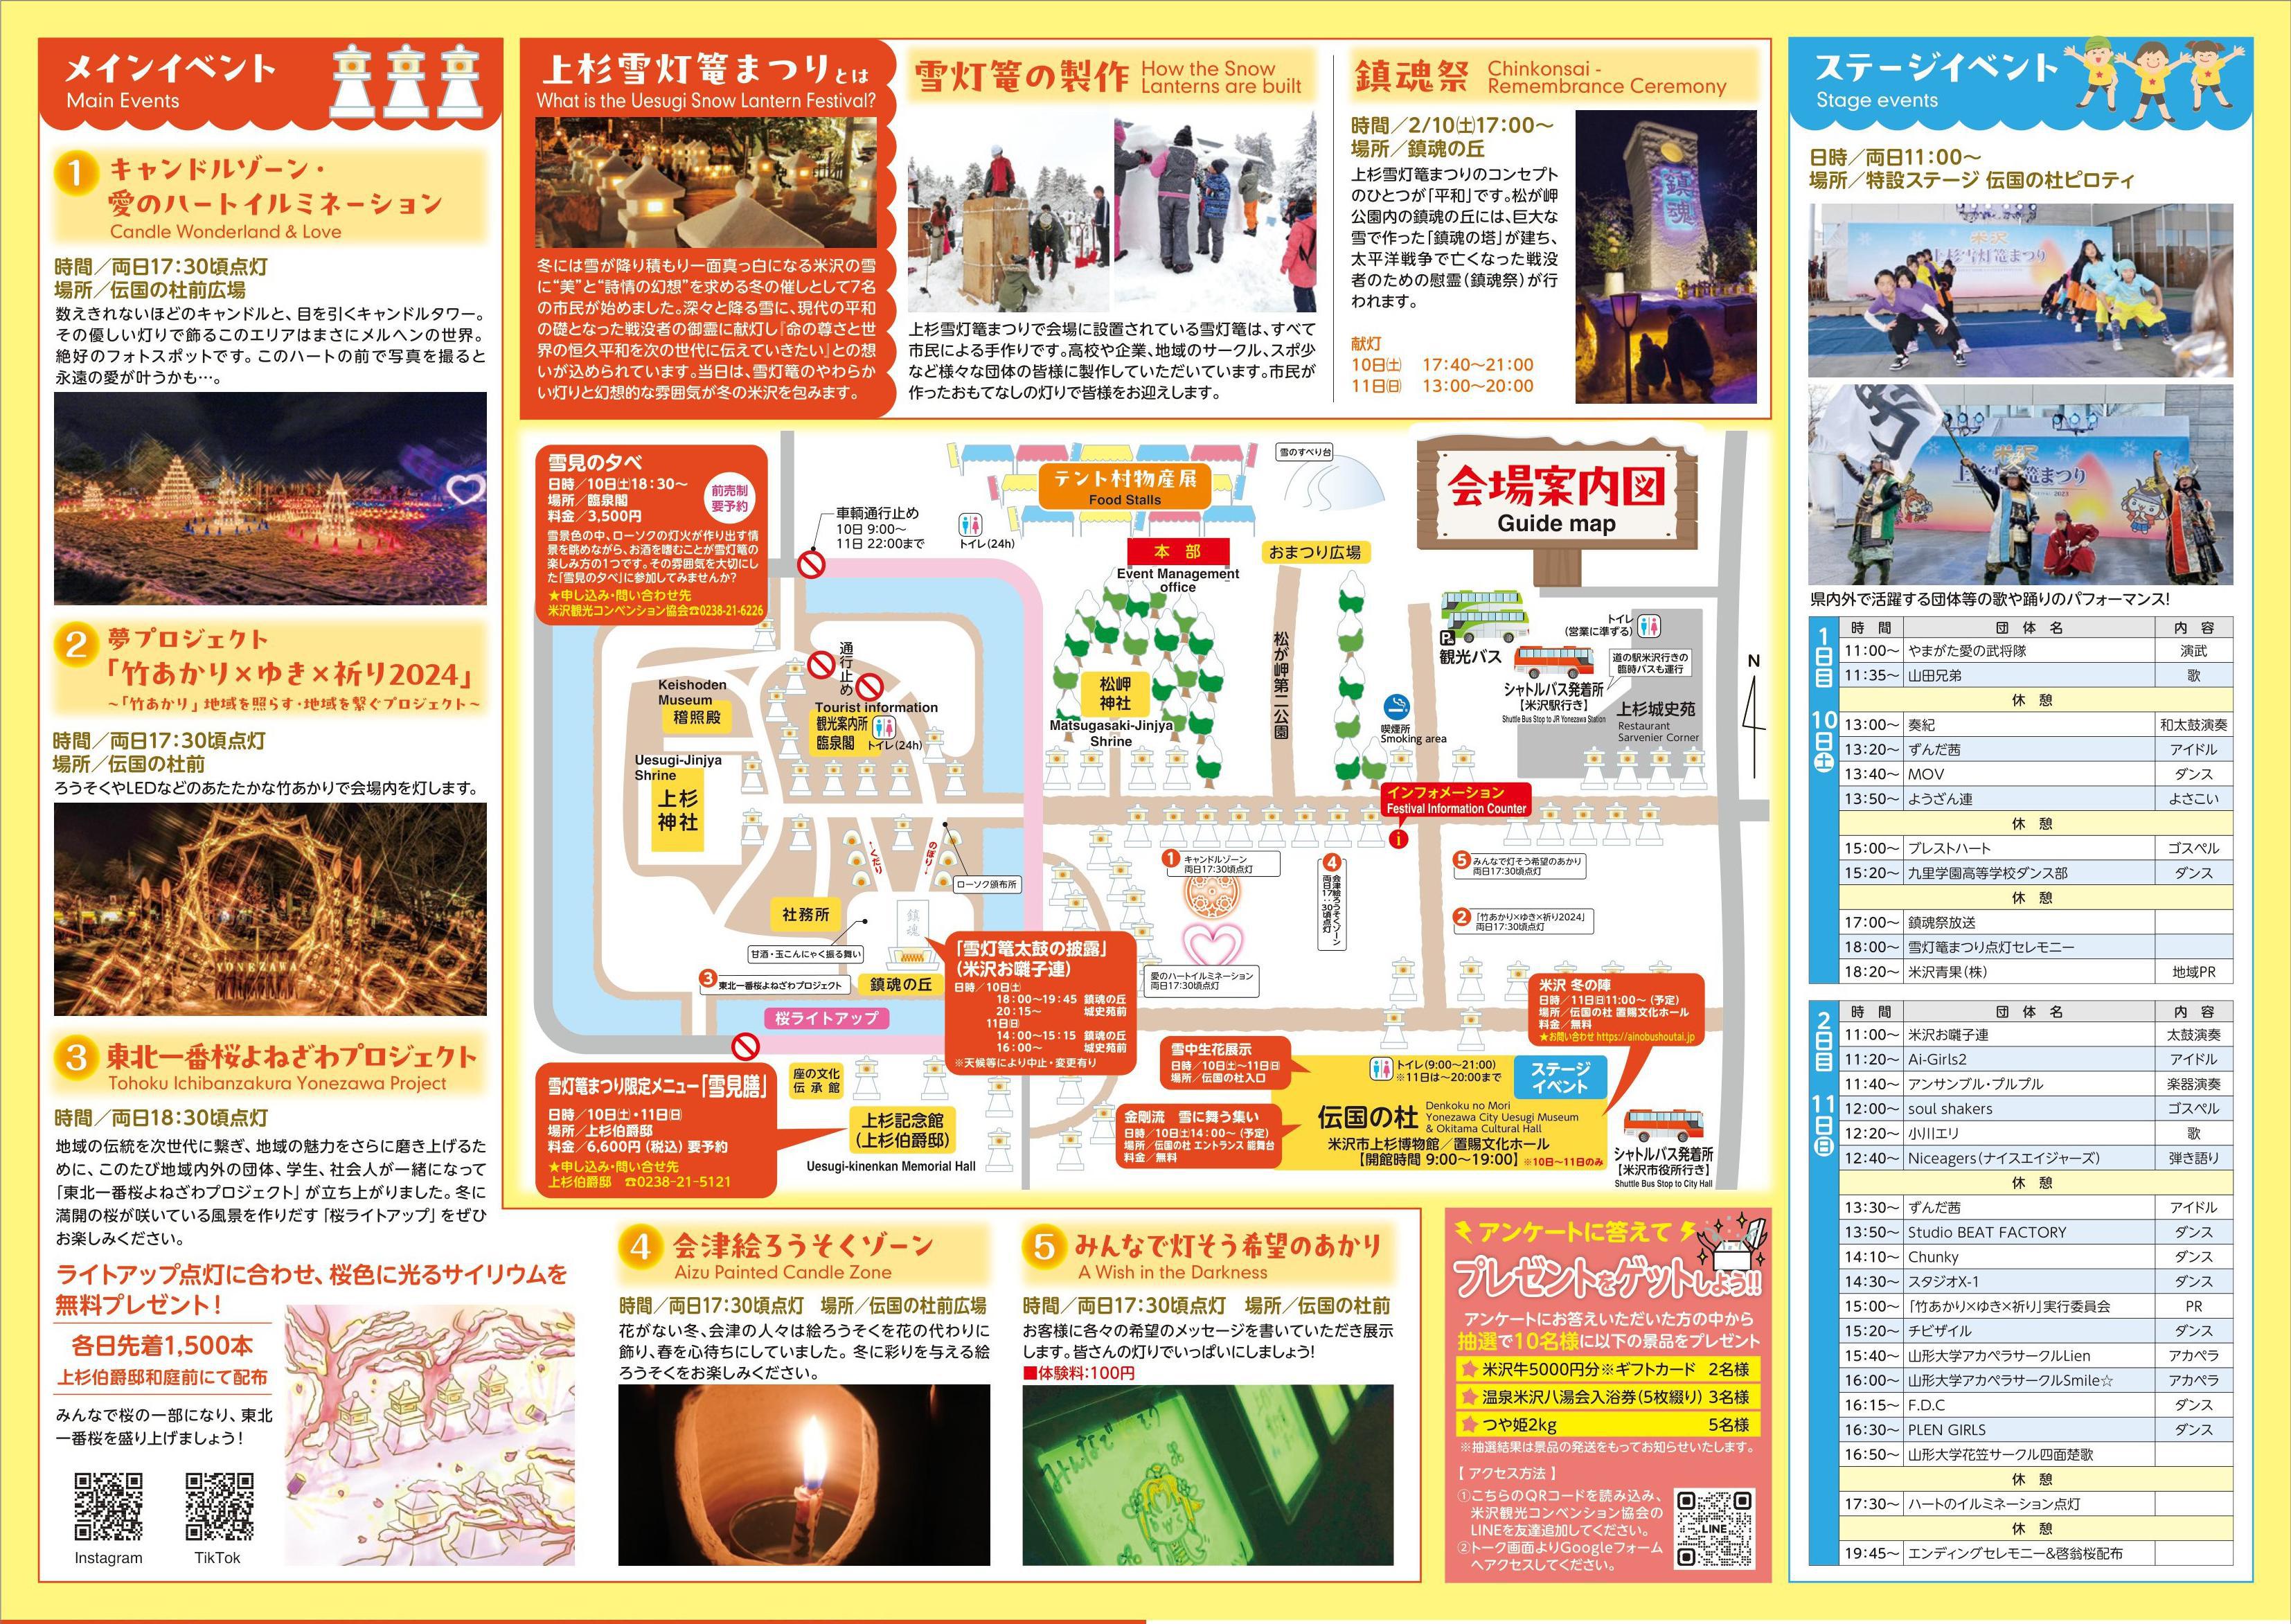 The 47th Uesugi Snow Lantern Festival is coming!